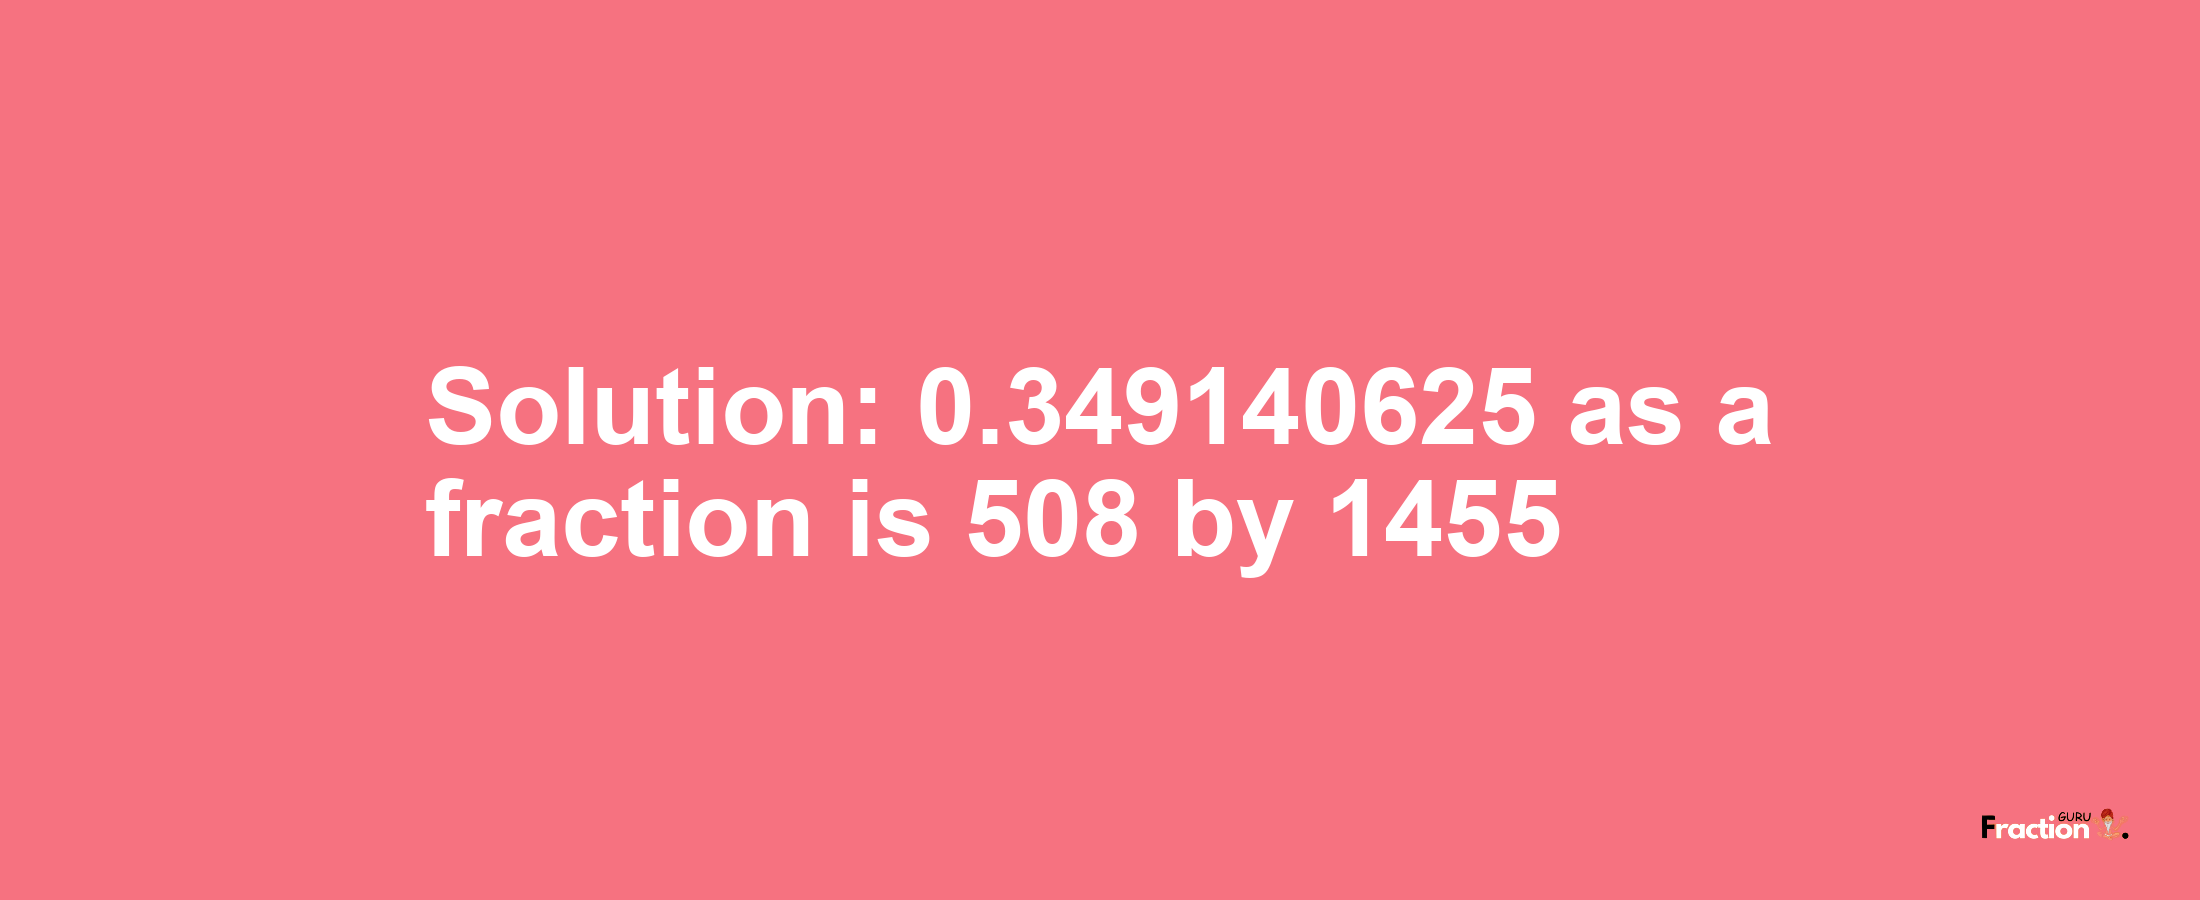 Solution:0.349140625 as a fraction is 508/1455